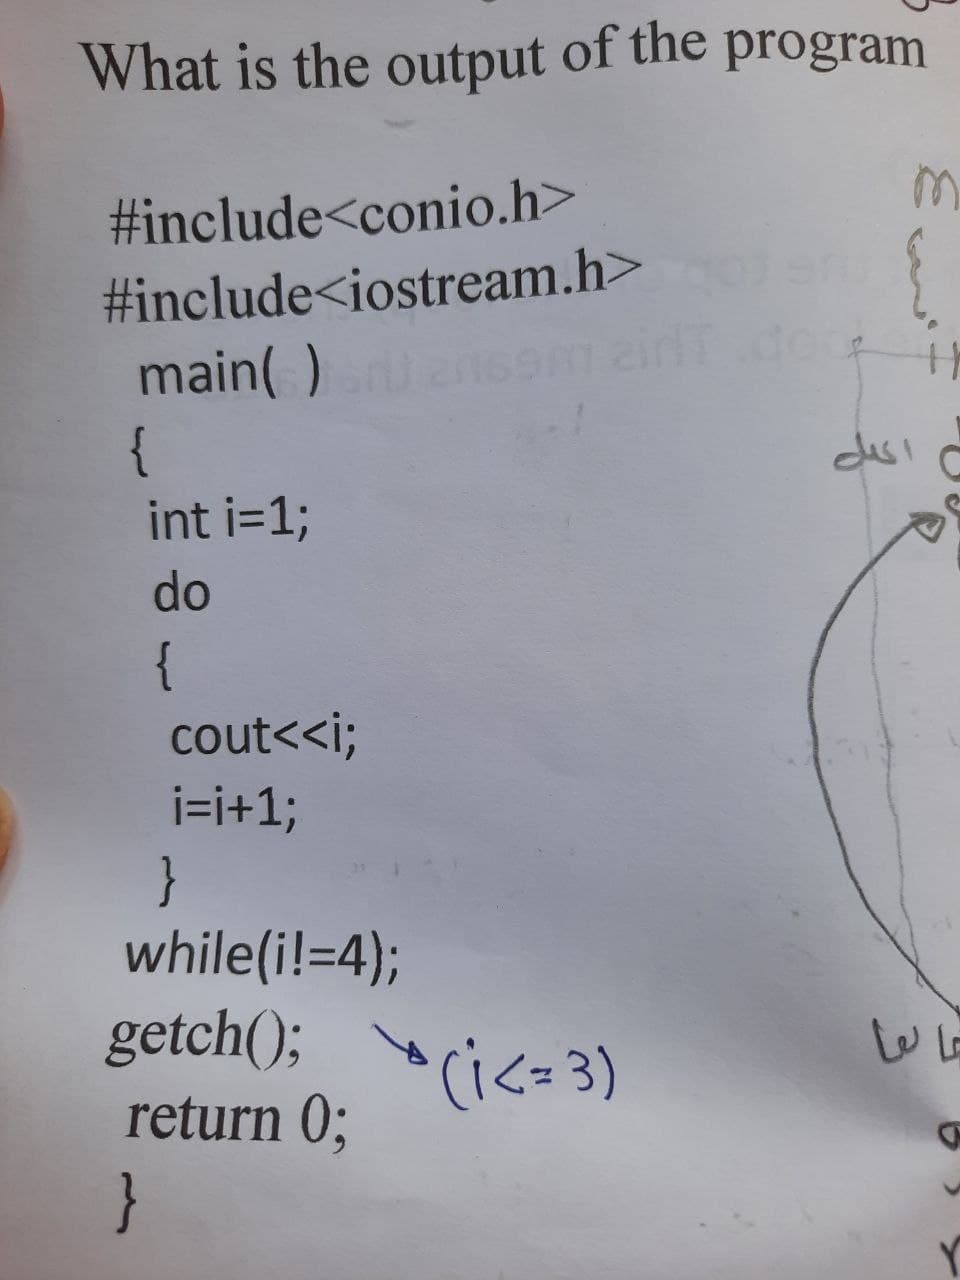 What is the output of the program
#include<conio.h>
#include<iostream.h>
main( )
{
int i=1;
do
{
cout<<i;
i=i+%;
}
while(i!=4);
getch();
return 0;
"(i<=3)
}
